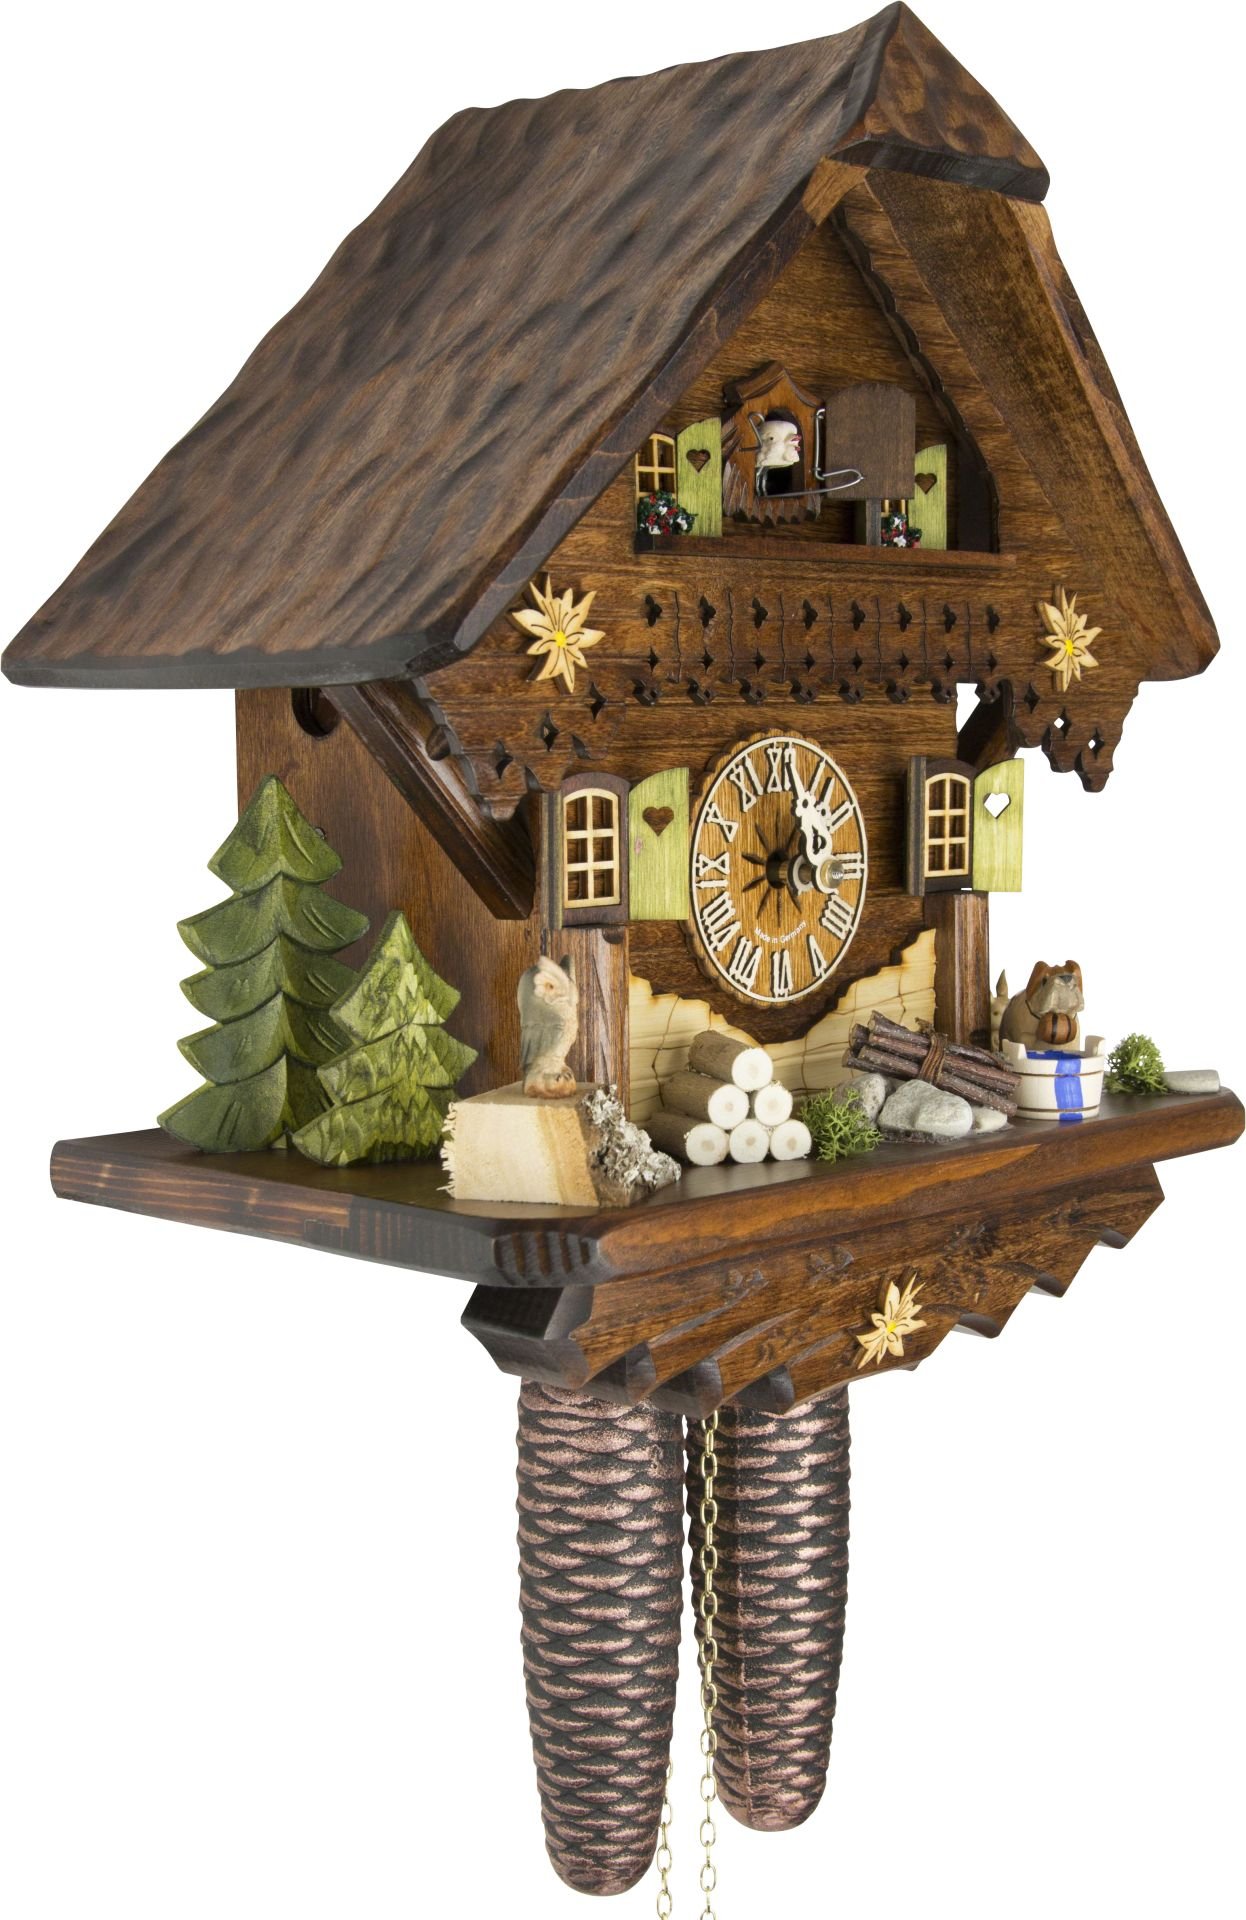 Cuckoo Clock Chalet Style 8 Day Movement 34cm by Cuckoo-Palace